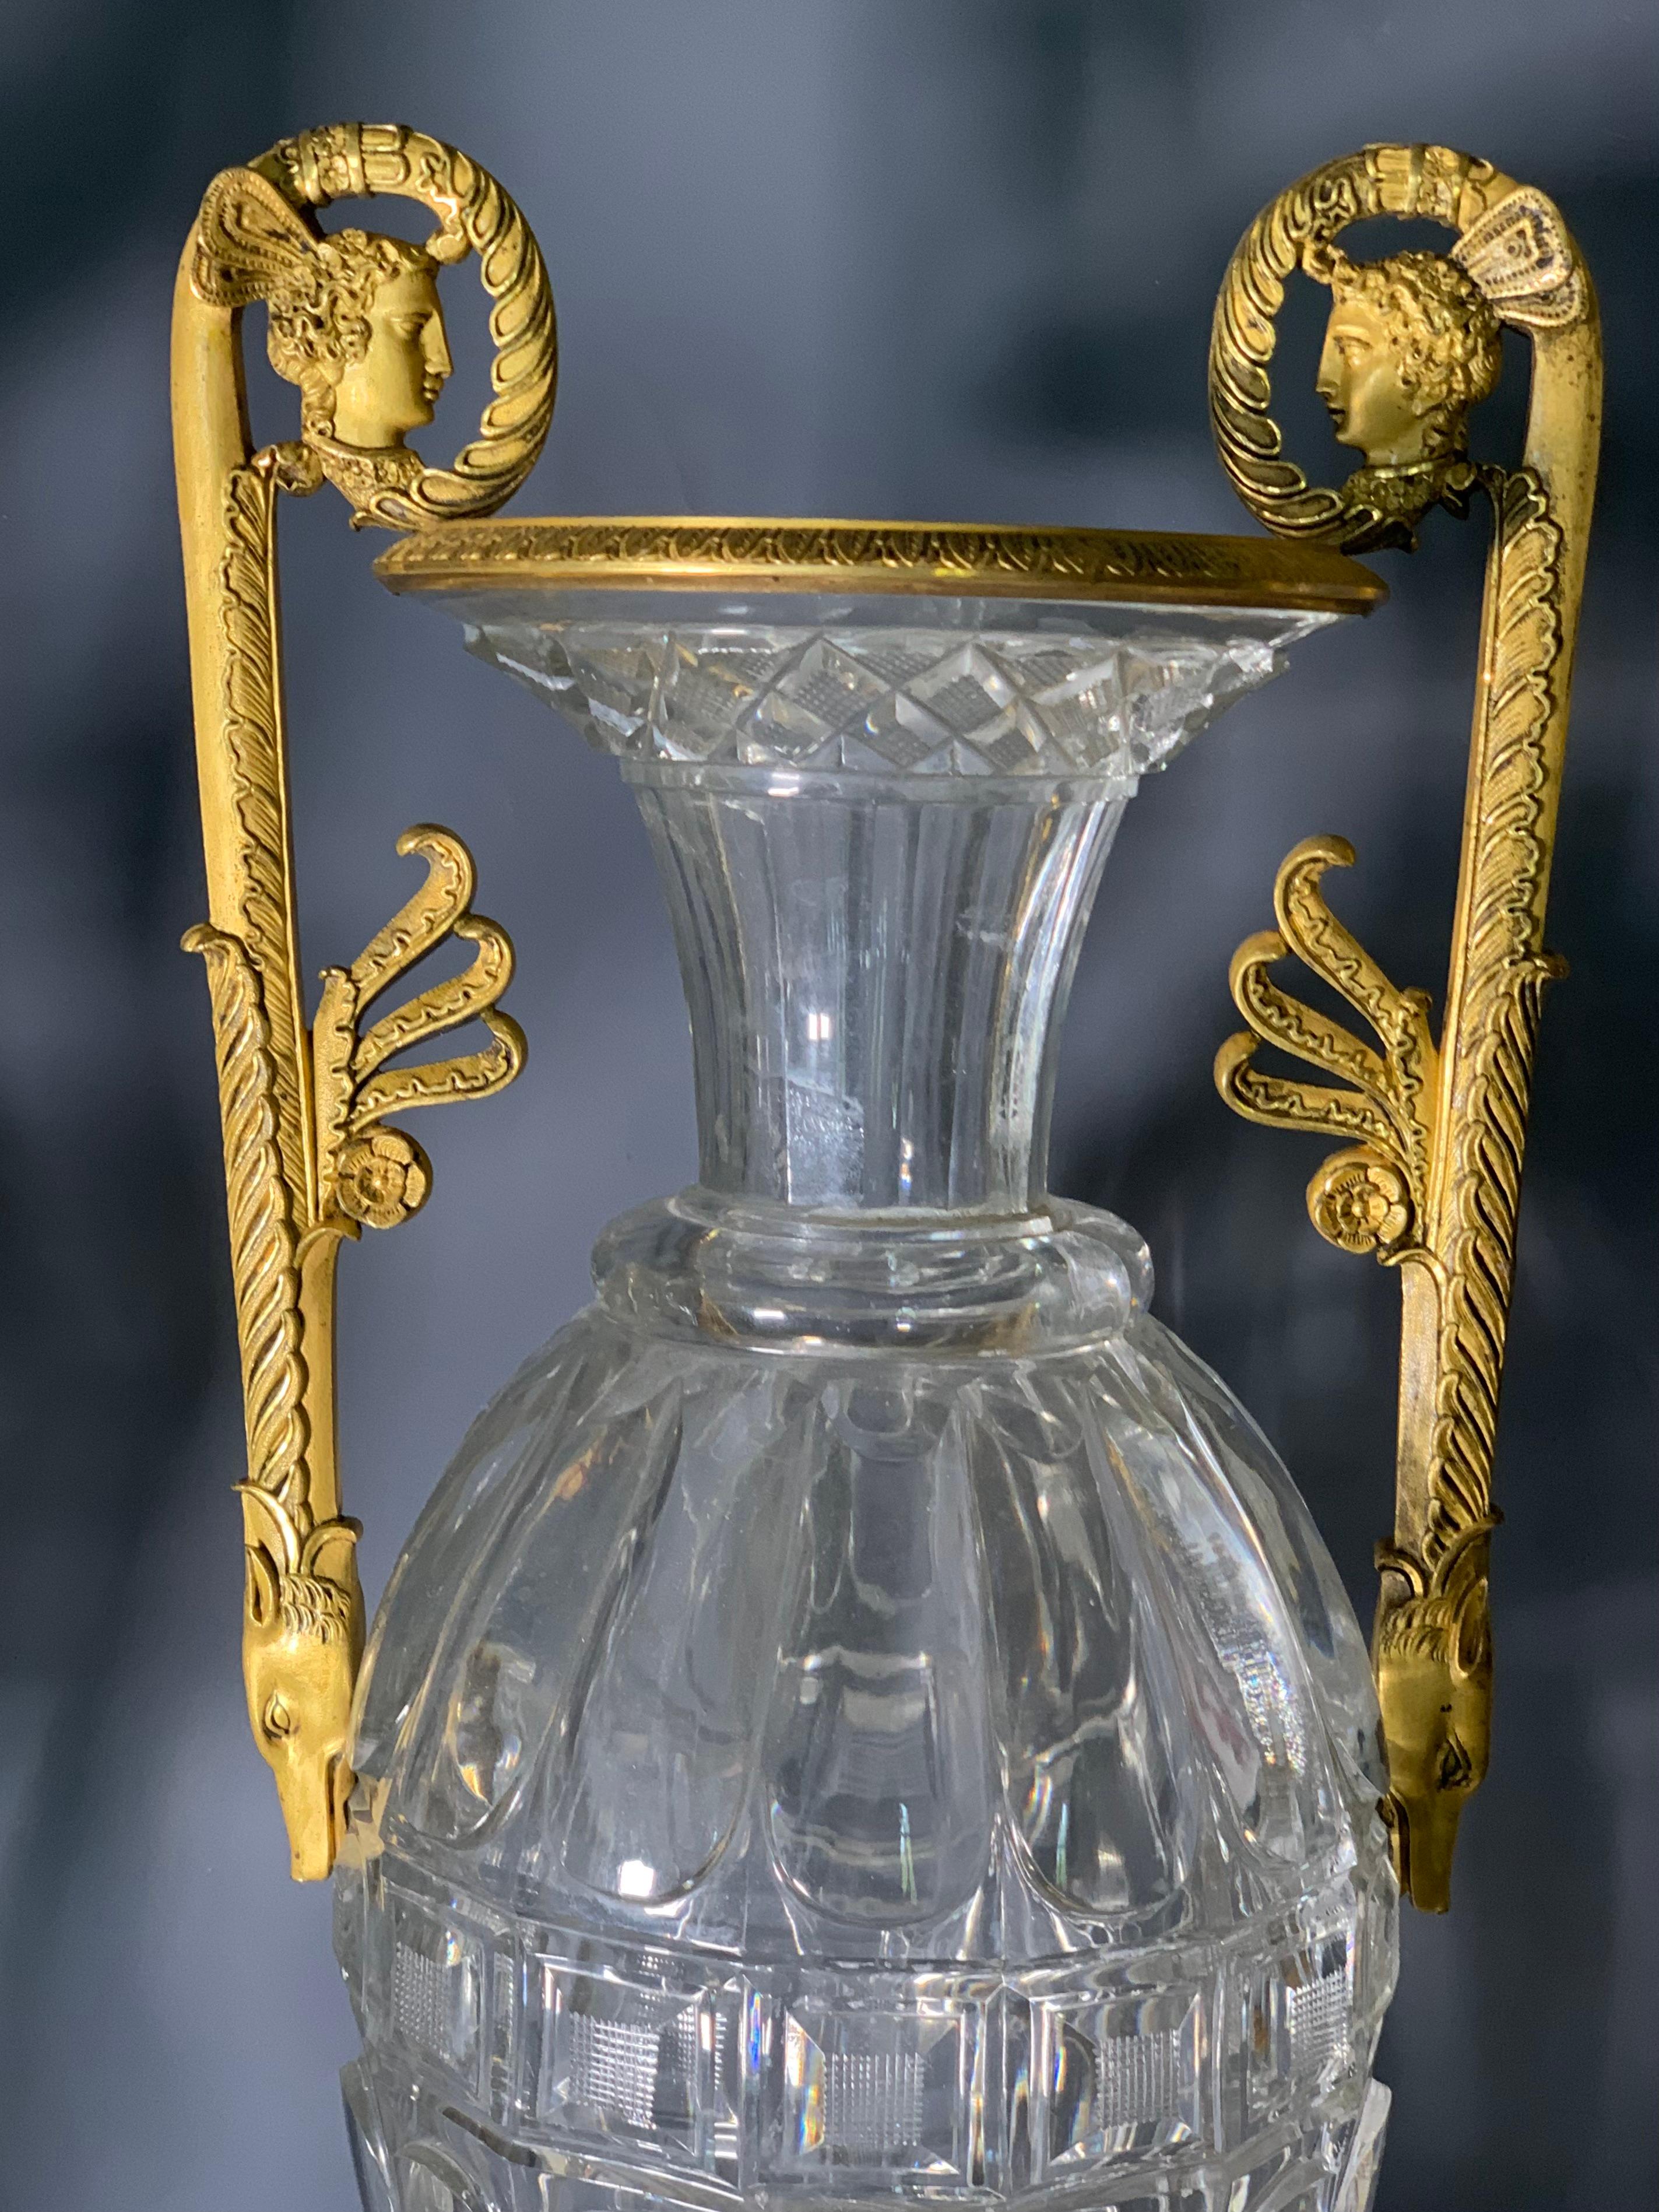 Outstanding  spindle vase in heavy cut crystal. 
Probably Cristallerie du Creusot  (Baccarat) or  Imperial Glassworks de Saint-Petersourg, around 1800.
The fixture with antique profiles and wolf's heads , original mercury ormolu, of high quality can